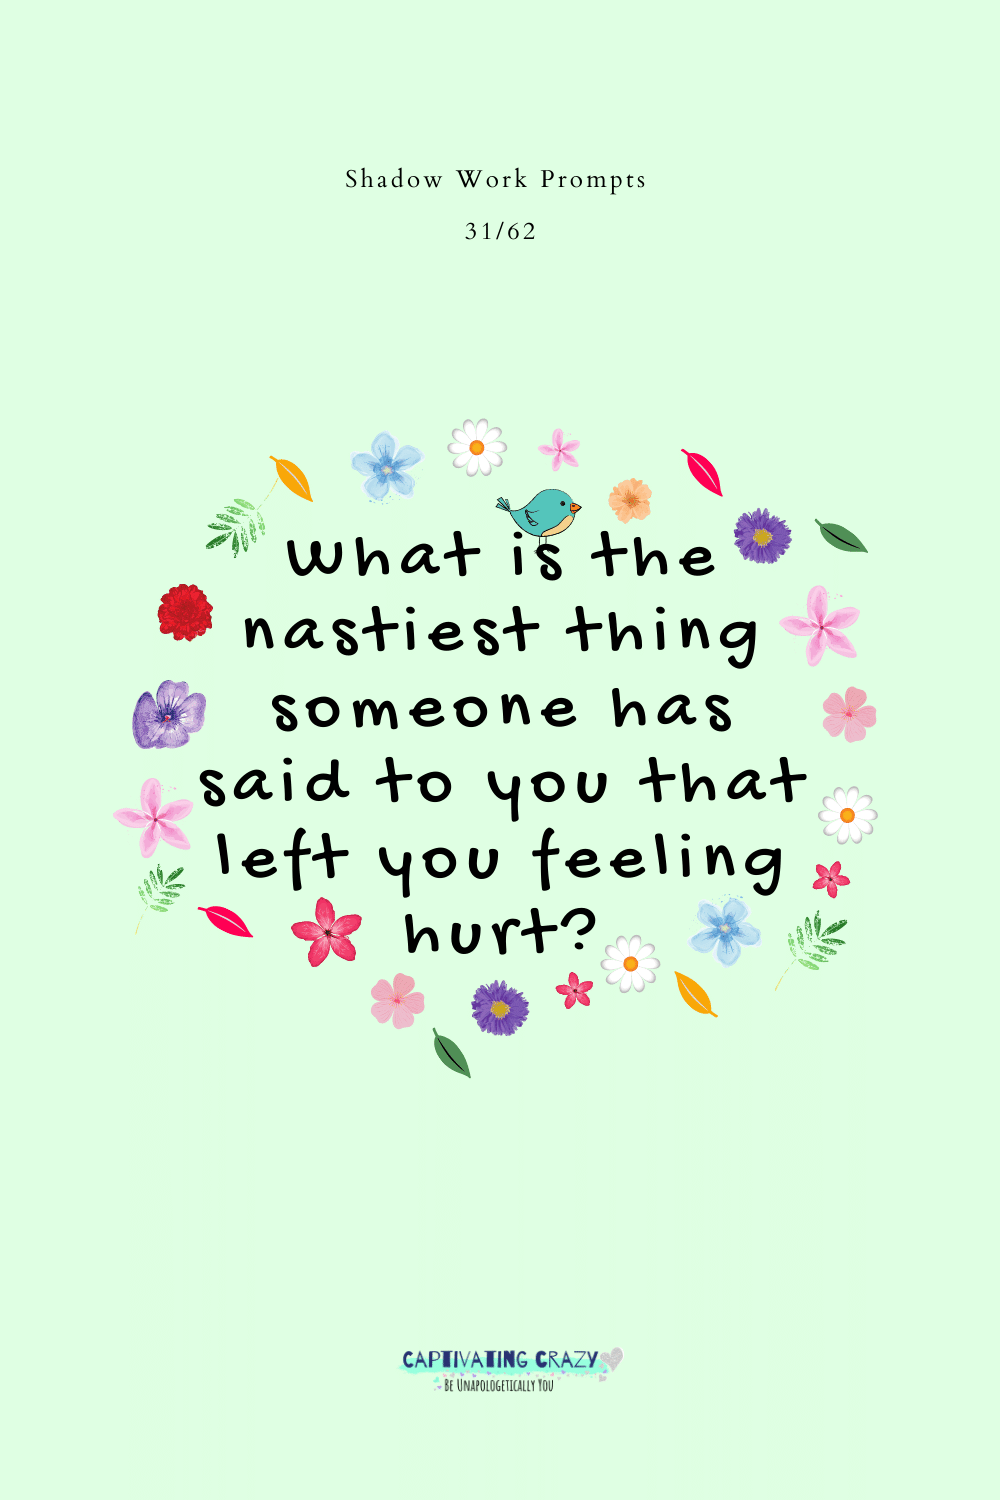 What is the nastiest thing someone has said to you that left you feeling hurt?